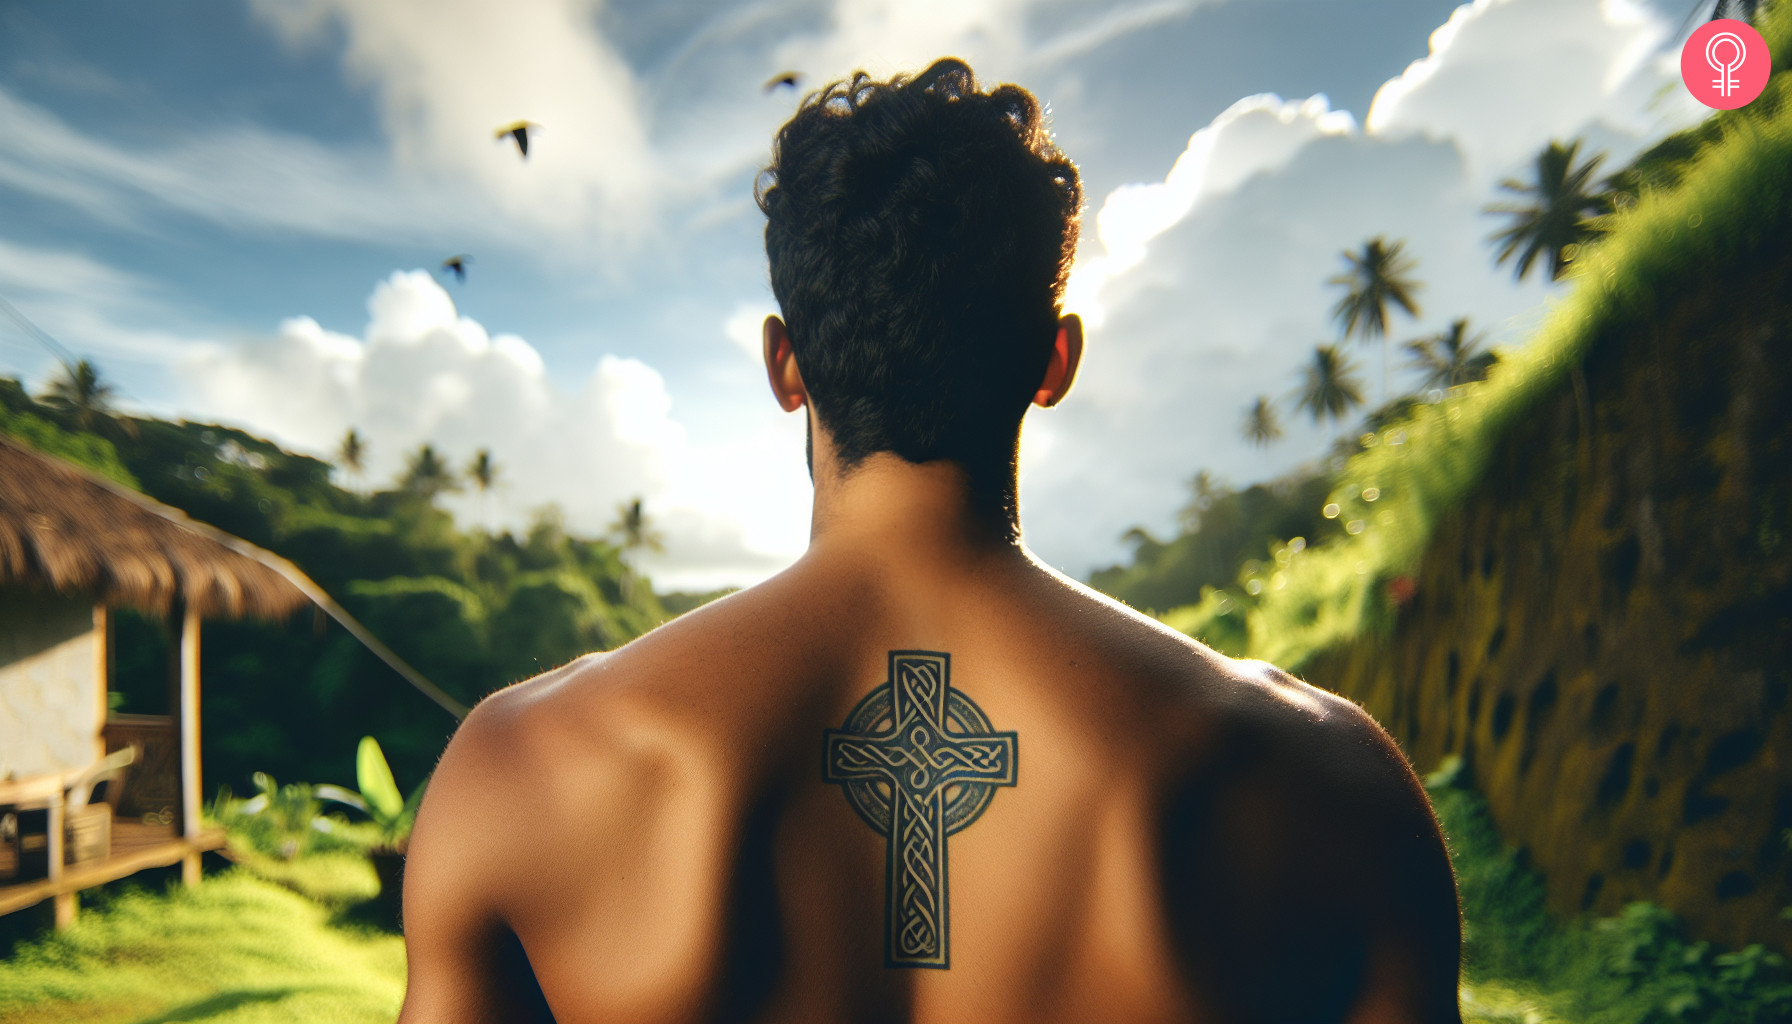 Celtic cross tattoo on the back of a man